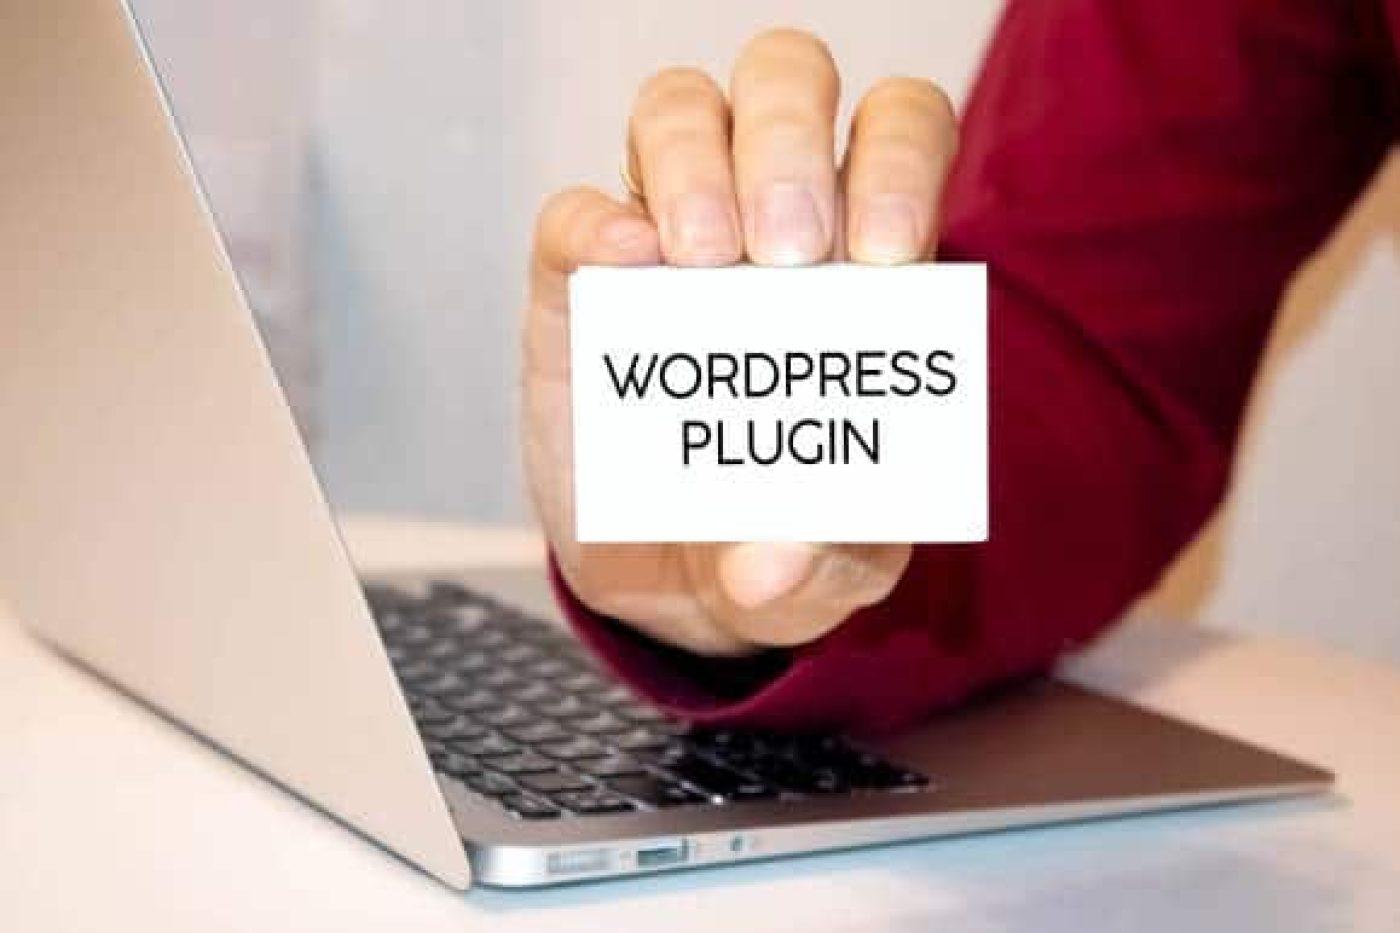 an overview of wordpress plugin tools